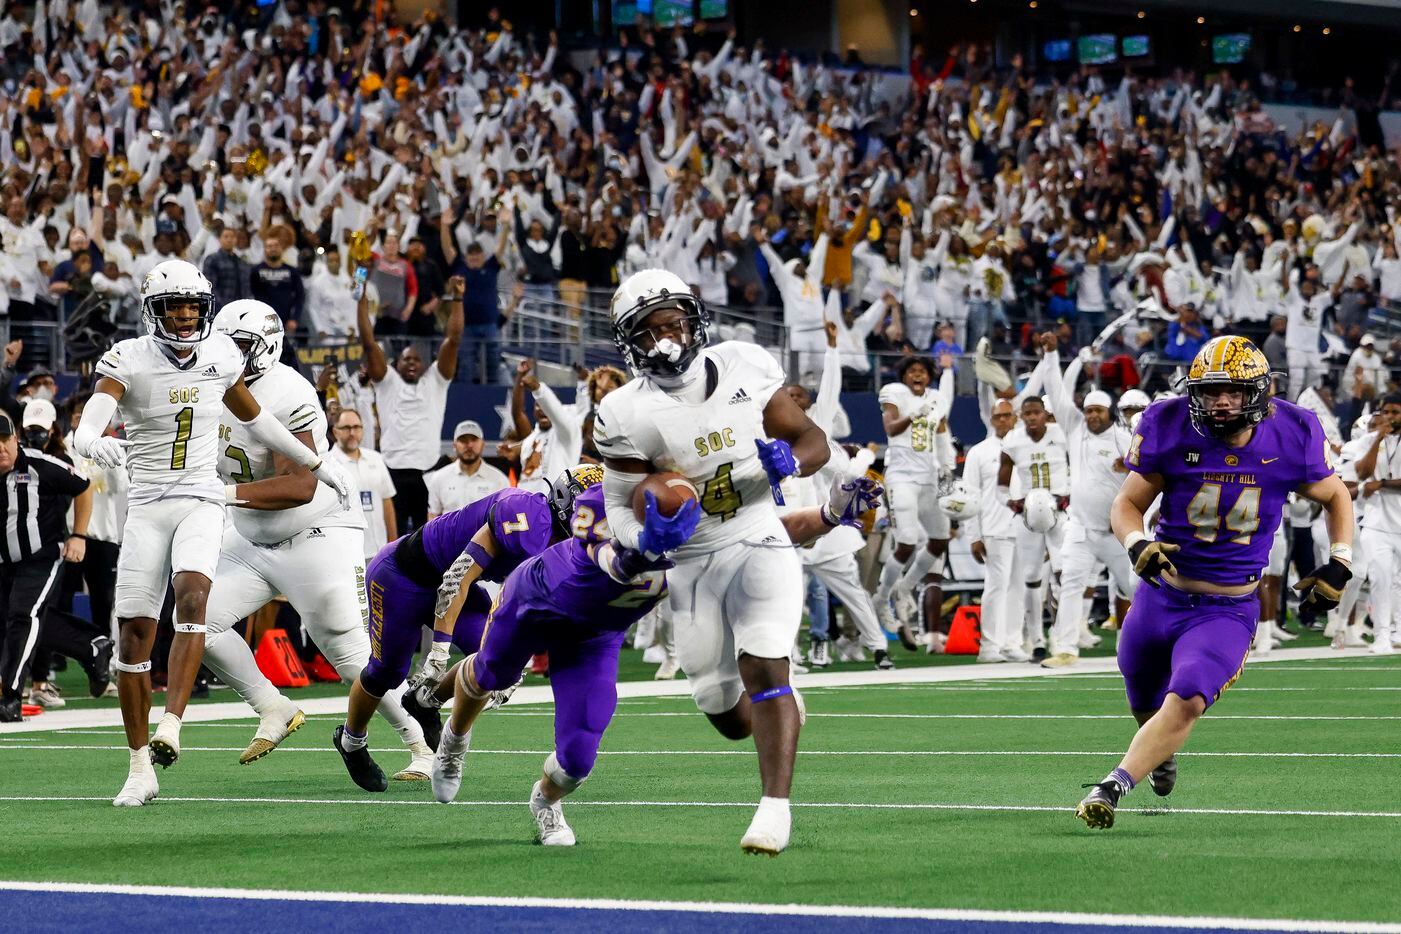 South Oak Cliff running back Qualon Farrar (4) breaks through the tackle of Liberty Hill defensive back Carter Hudson (24) for a touchdown during the fourth quarter of their Class 5A Division II state championship game at AT&T Stadium in Arlington, Saturday, Dec. 18, 2021. South Oak Cliff defeated Liberty Hill 23-14 for Dallas ISD’s first title since 1958. (Elias Valverde II/The Dallas Morning News)